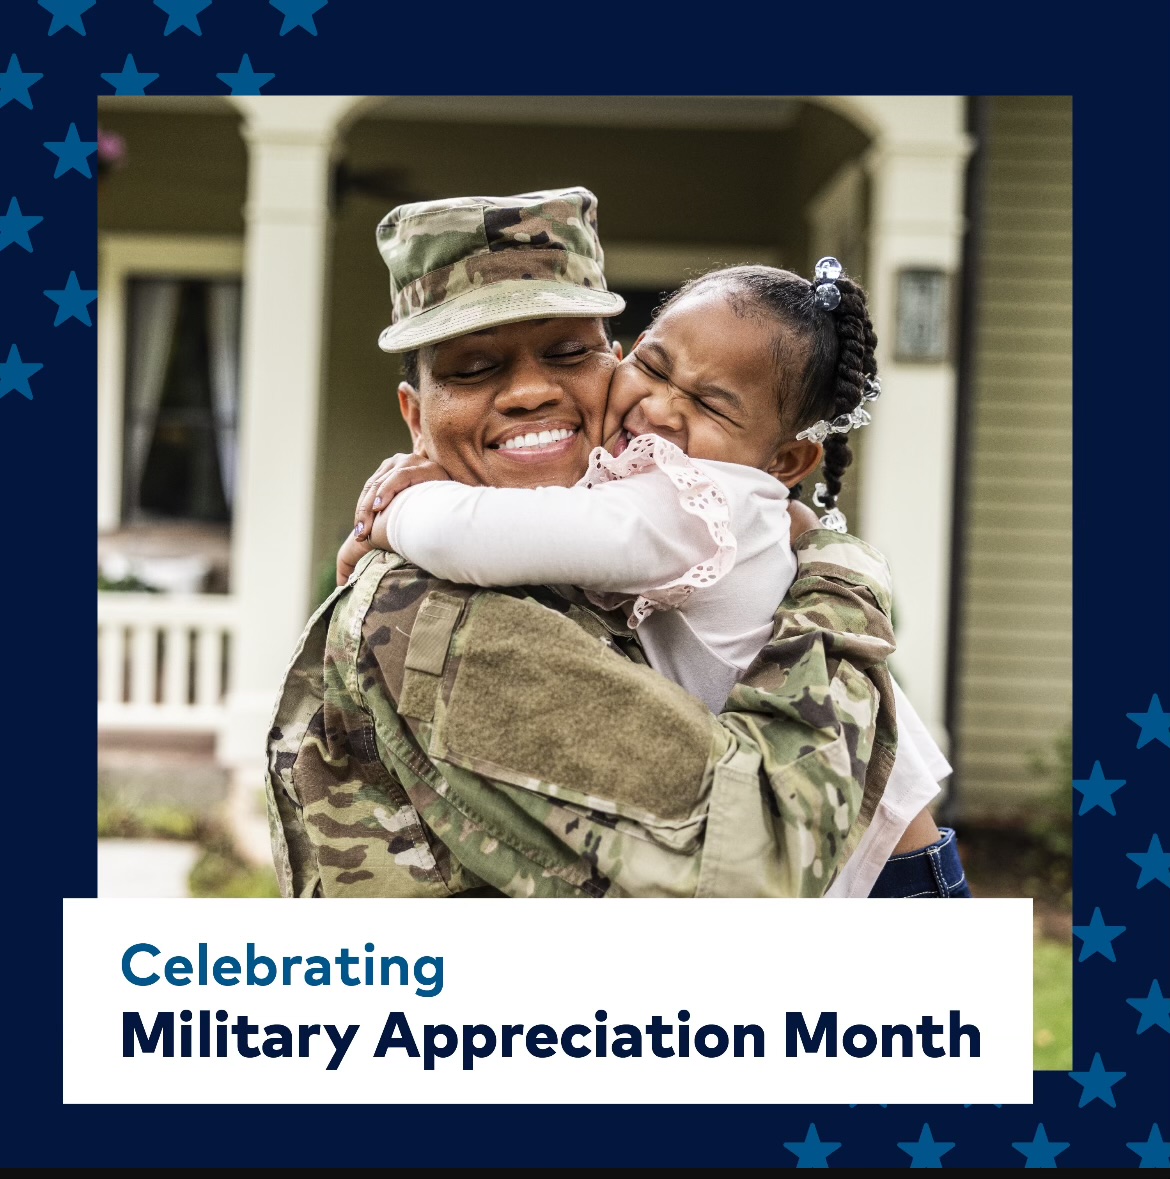 In honor of #MilitaryAppreciationMonth, HealthONE joins the larger @HCAHealthcare network in sending our deepest gratitude to those who serve our nation with selfless courage and recognizes the unwavering dedication of the families who support them. #HCAVeterans